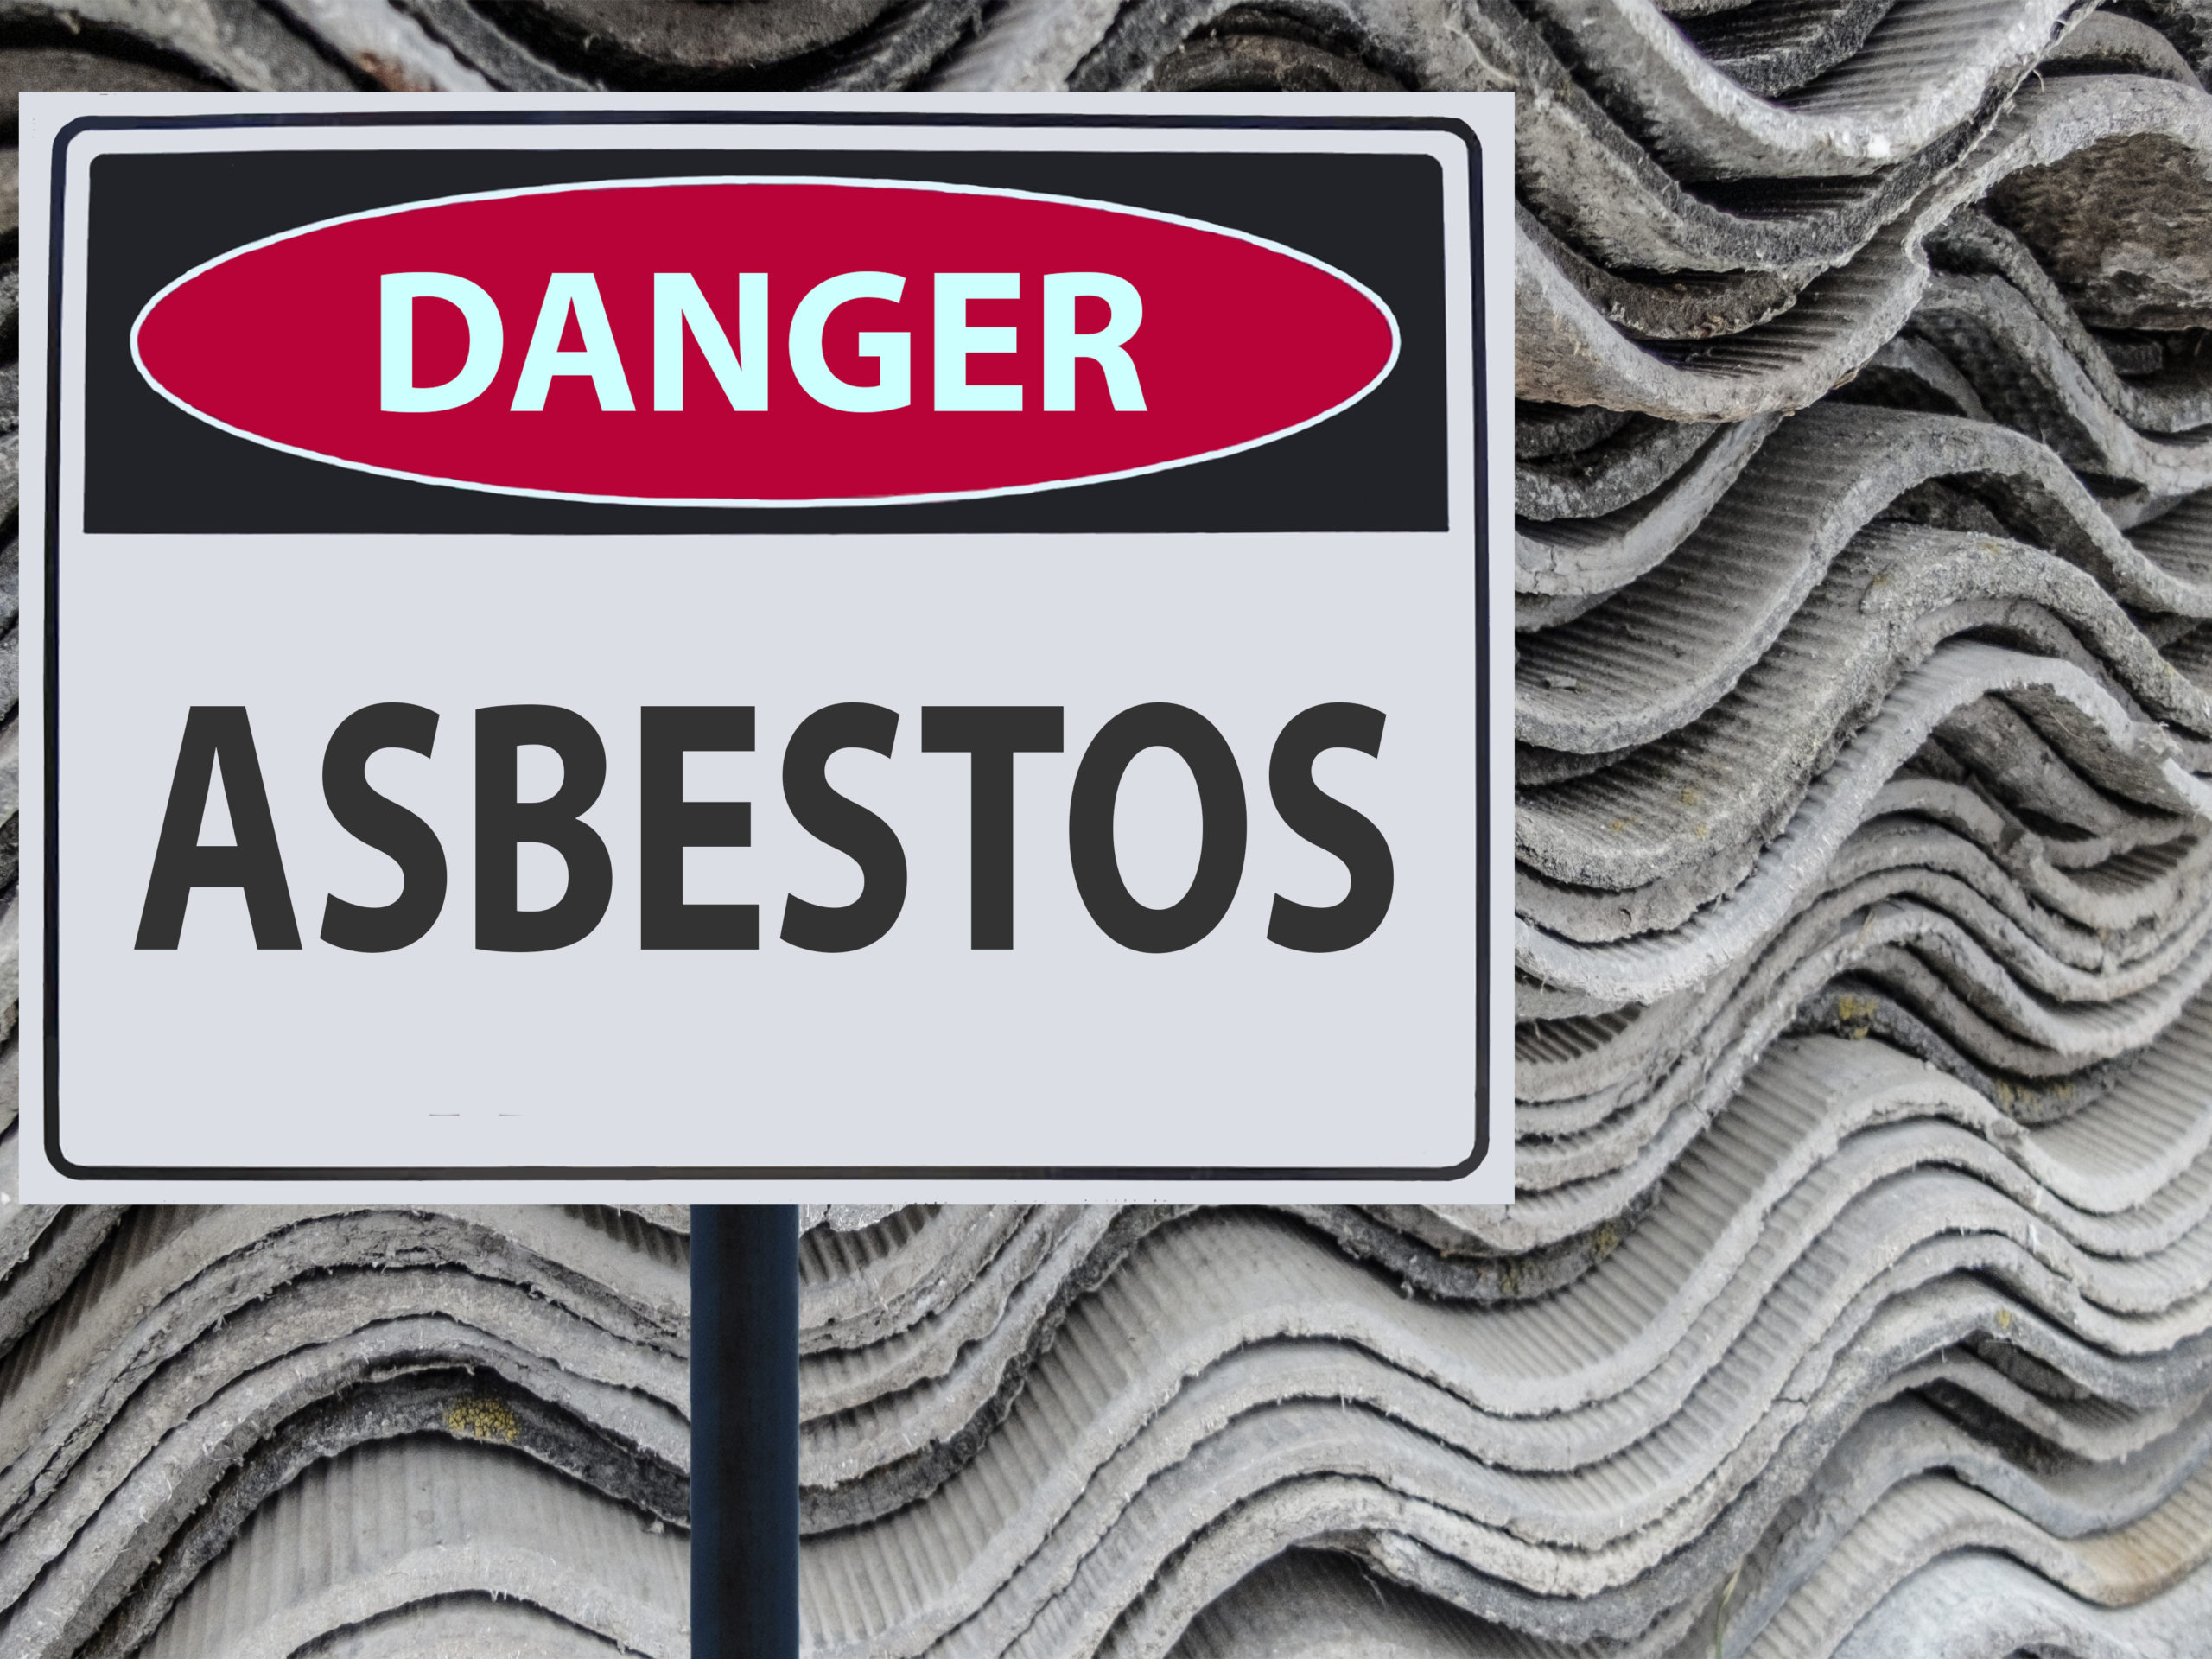 Bradford Construction Company Fined for Exposing Workers to Asbestos